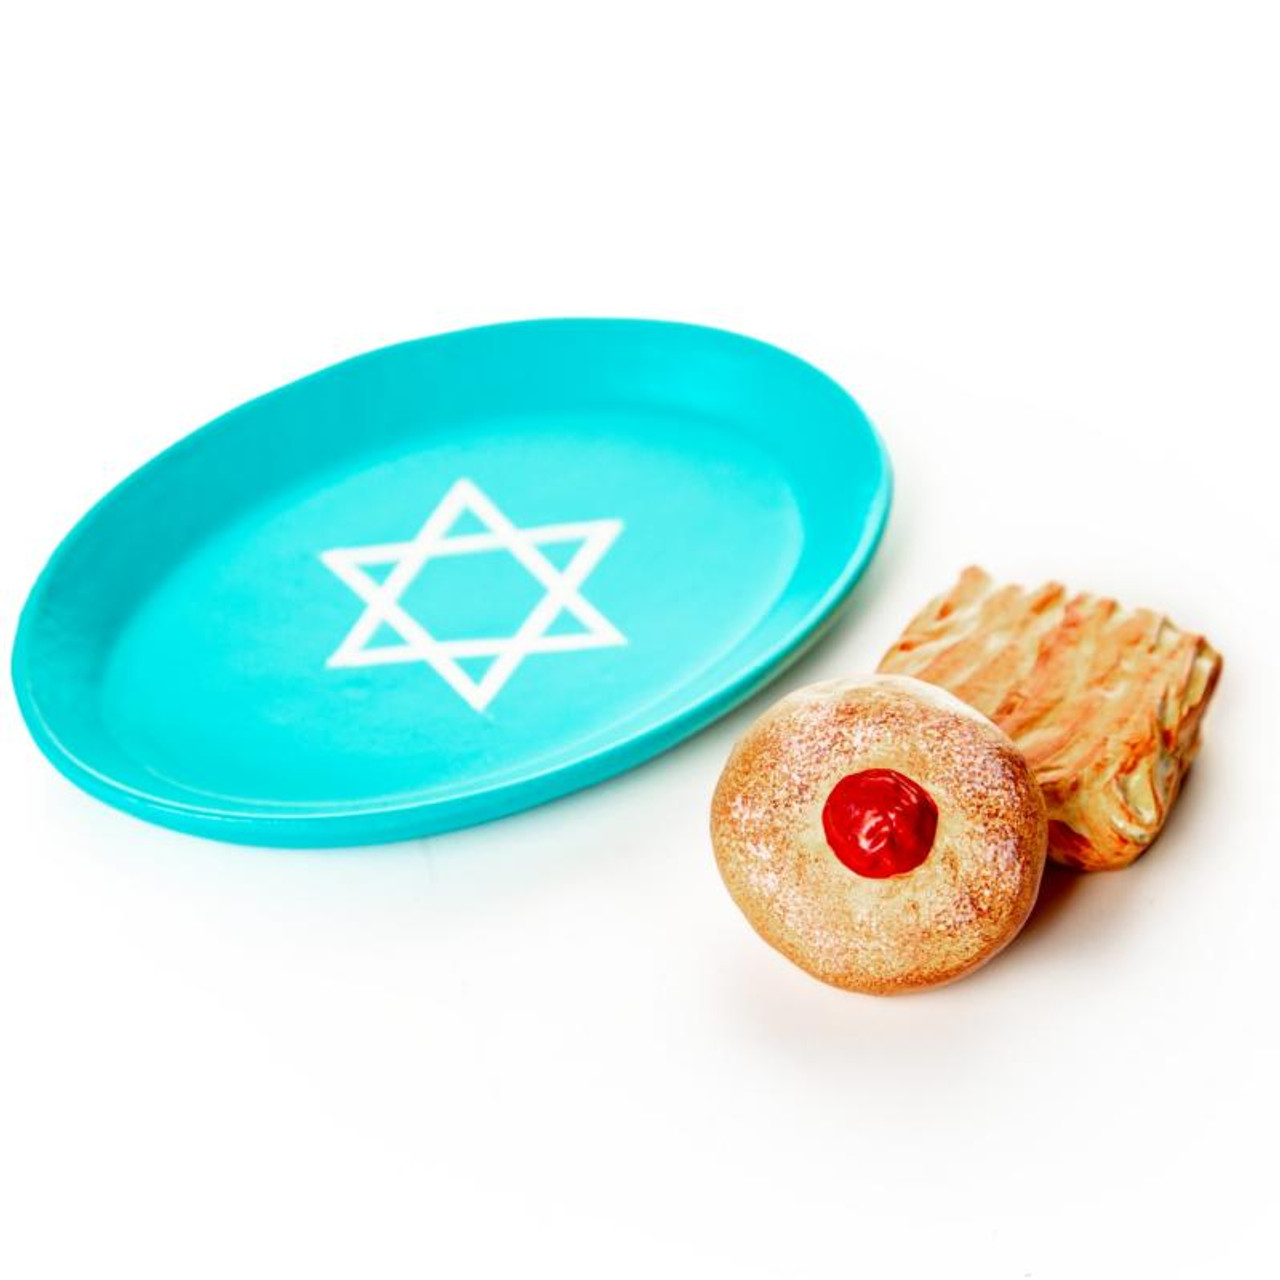 https://cdn11.bigcommerce.com/s-m5vcu70215/images/stencil/1280x1280/products/166/2103/the-queens-treasures-22-pc-hanukkah-play-accessory-and-food-set-accessories-for-18-inch-dolls__67565.1692299468.jpg?c=1